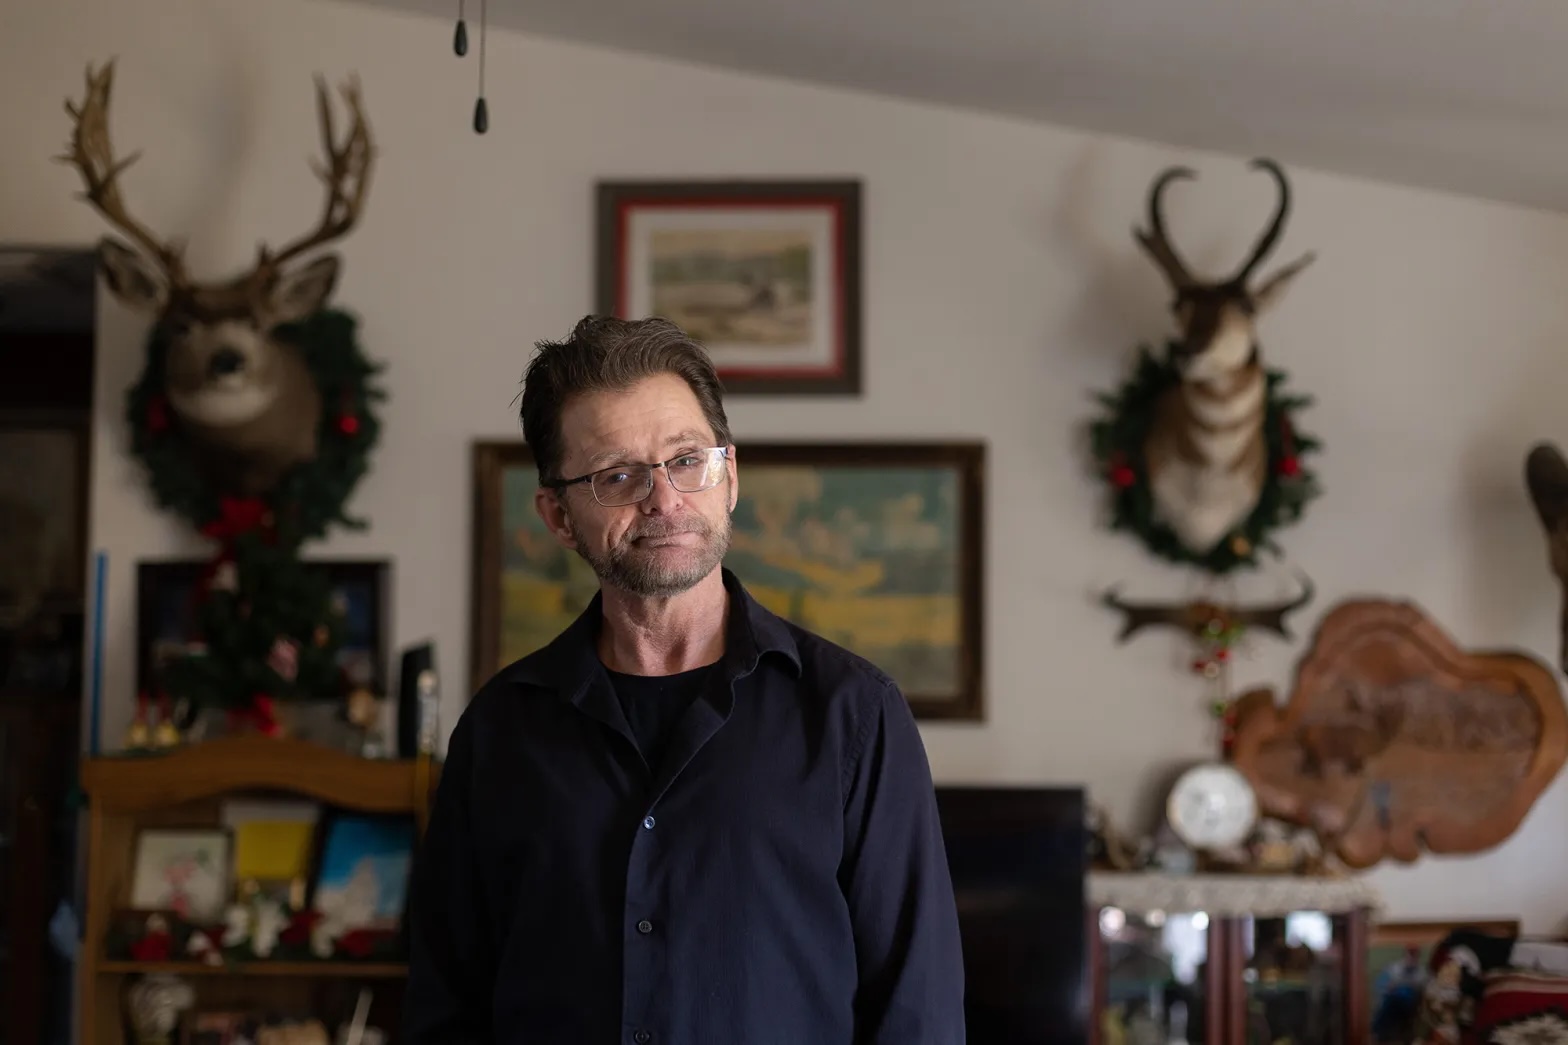 A white middle aged man looks and smiles wryly at the camera, wearing glasses, in a room with maps and deer heads mounted on the wall.